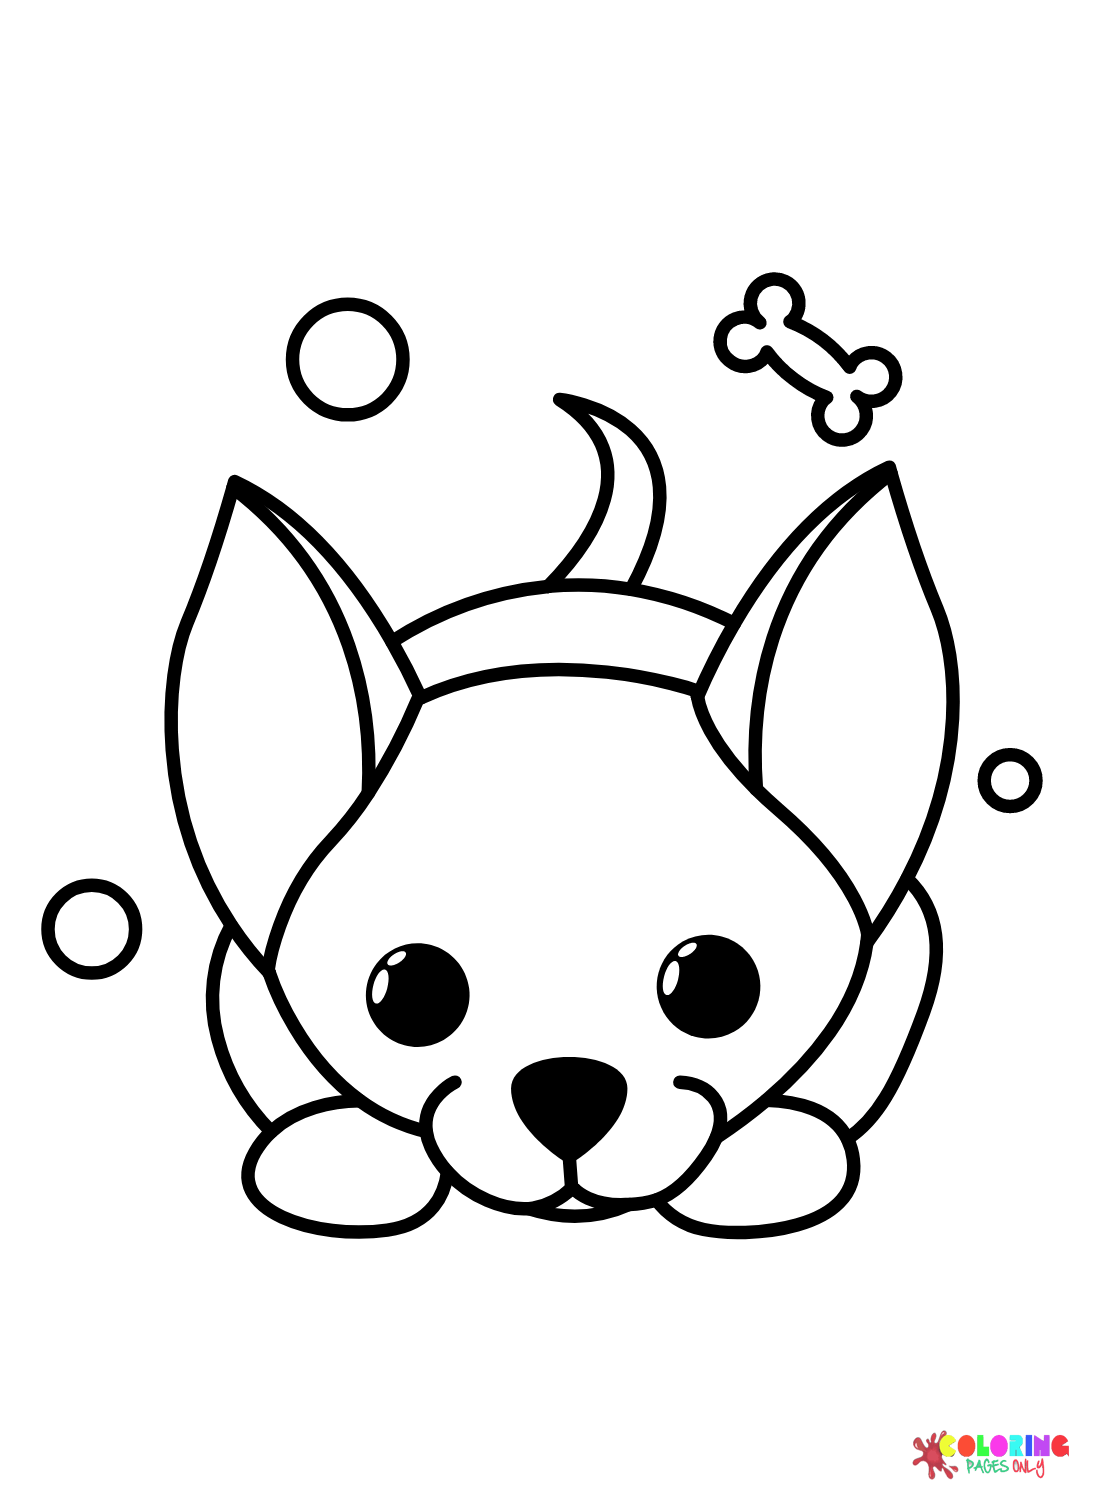 chihuahua-dog-coloring-pages-free-printable-coloring-pages